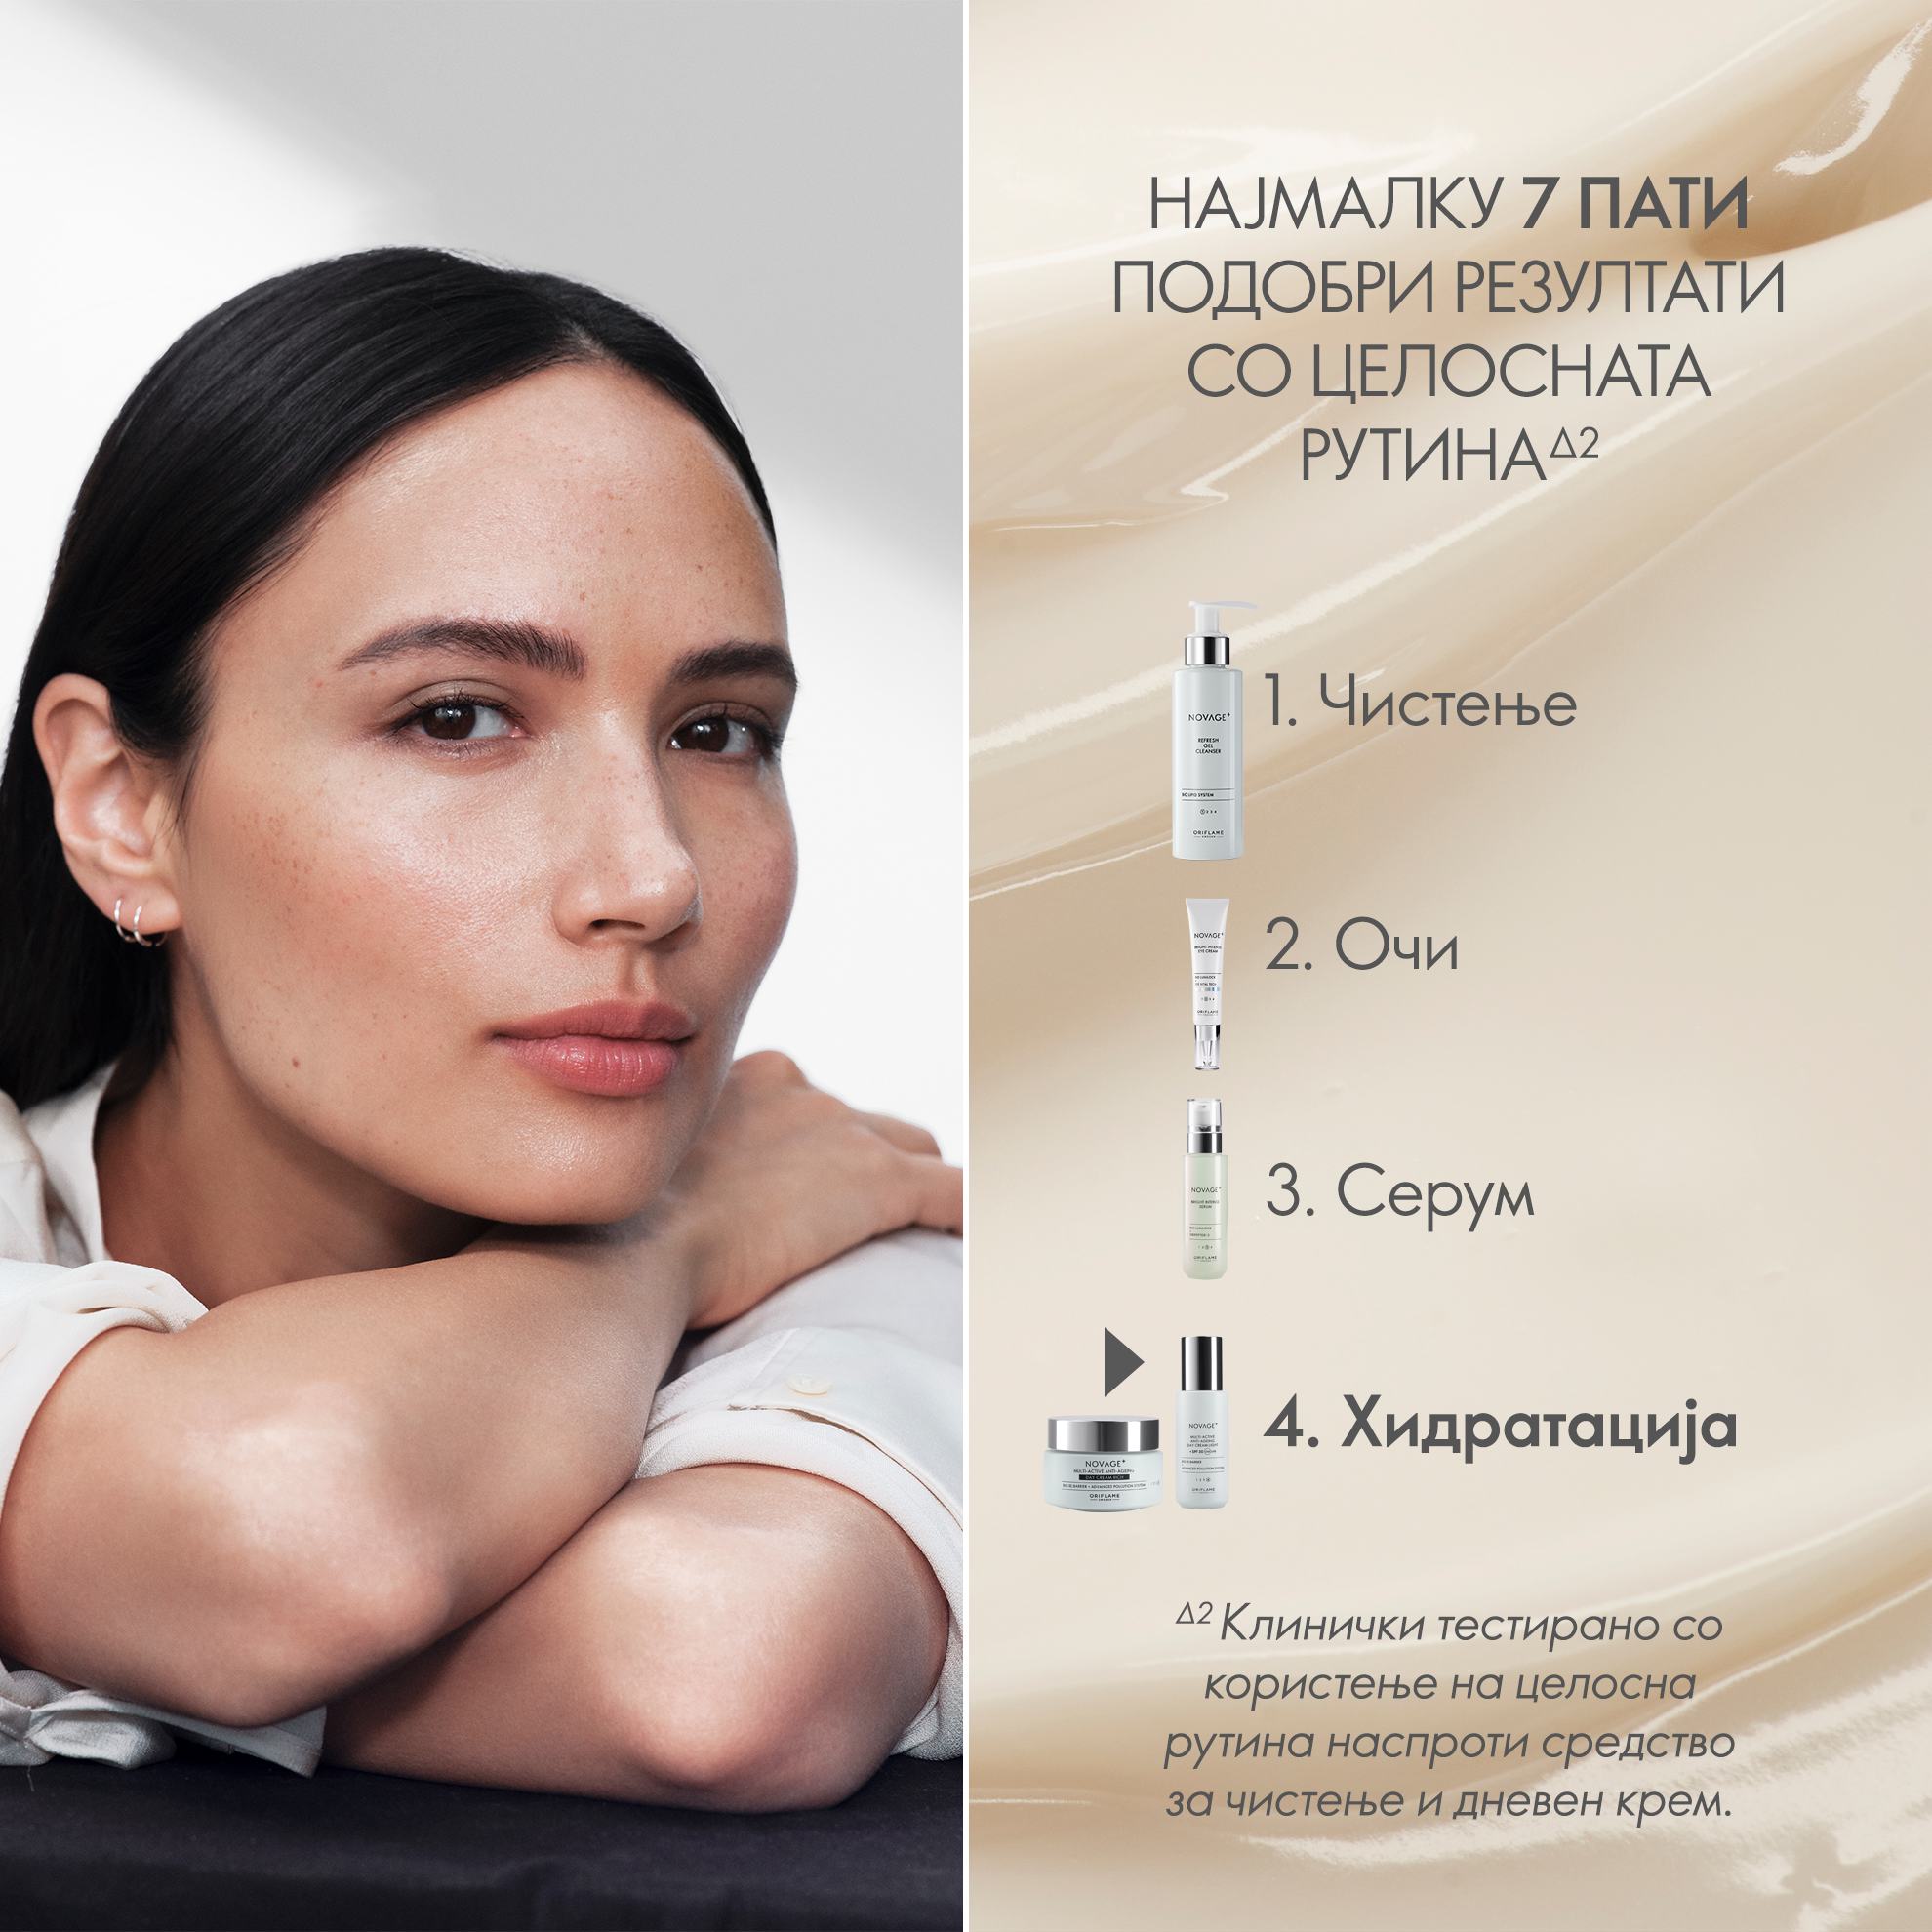 https://media-cdn.oriflame.com/productImage?externalMediaId=product-management-media%2fProducts%2f41047%2fMK%2f41047_4.png&id=17583830&version=2